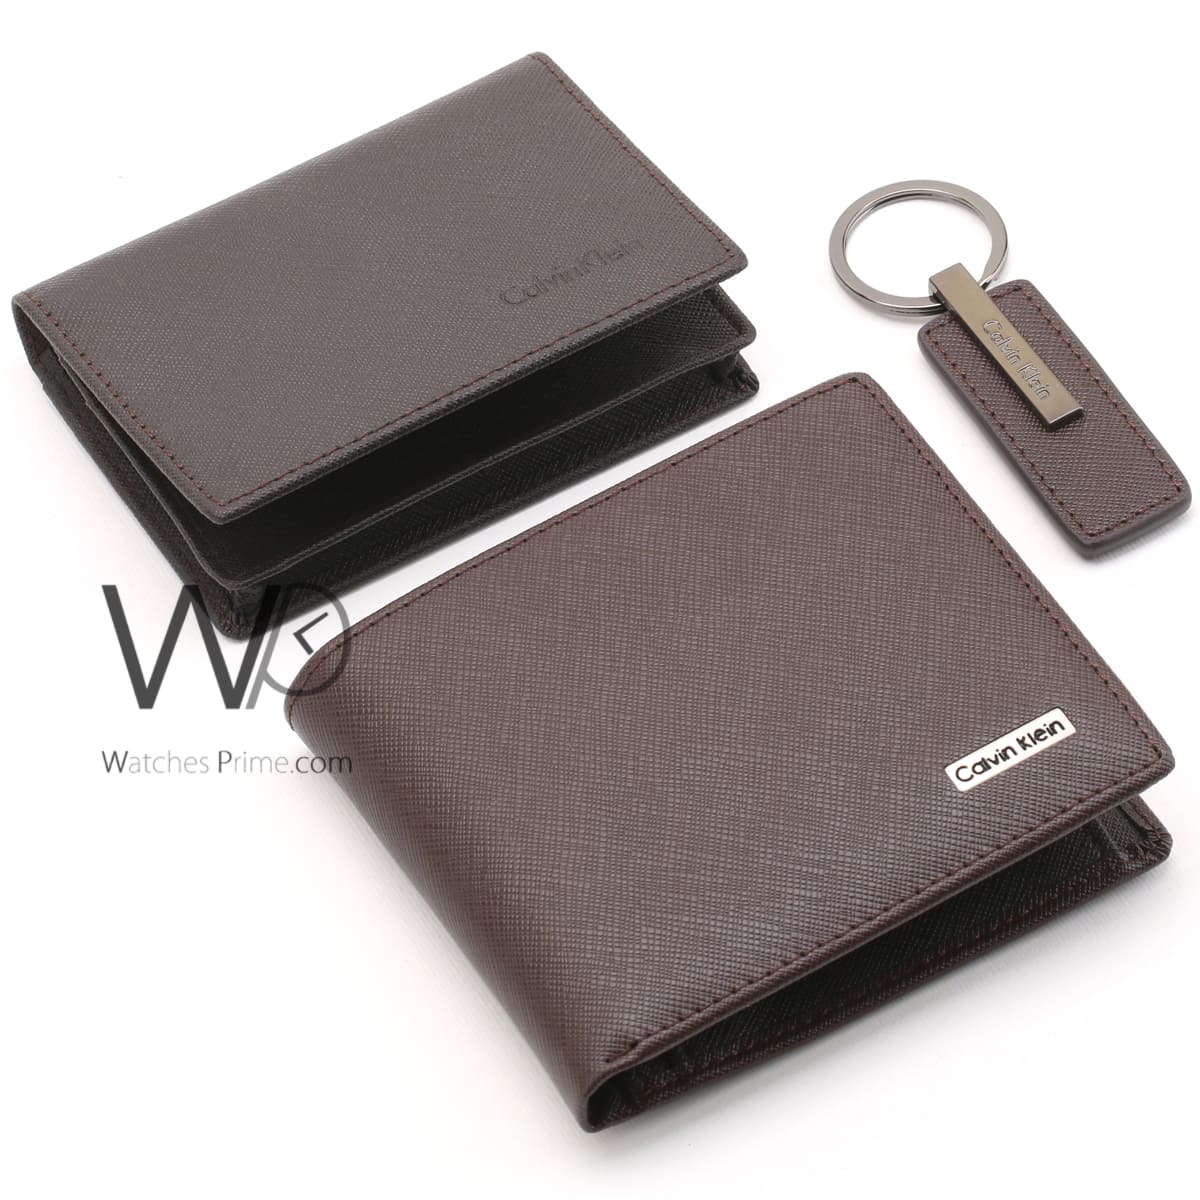 Calvin Klein RFID Extra-Capacity Wallet with Key Fob | CoolSprings Galleria